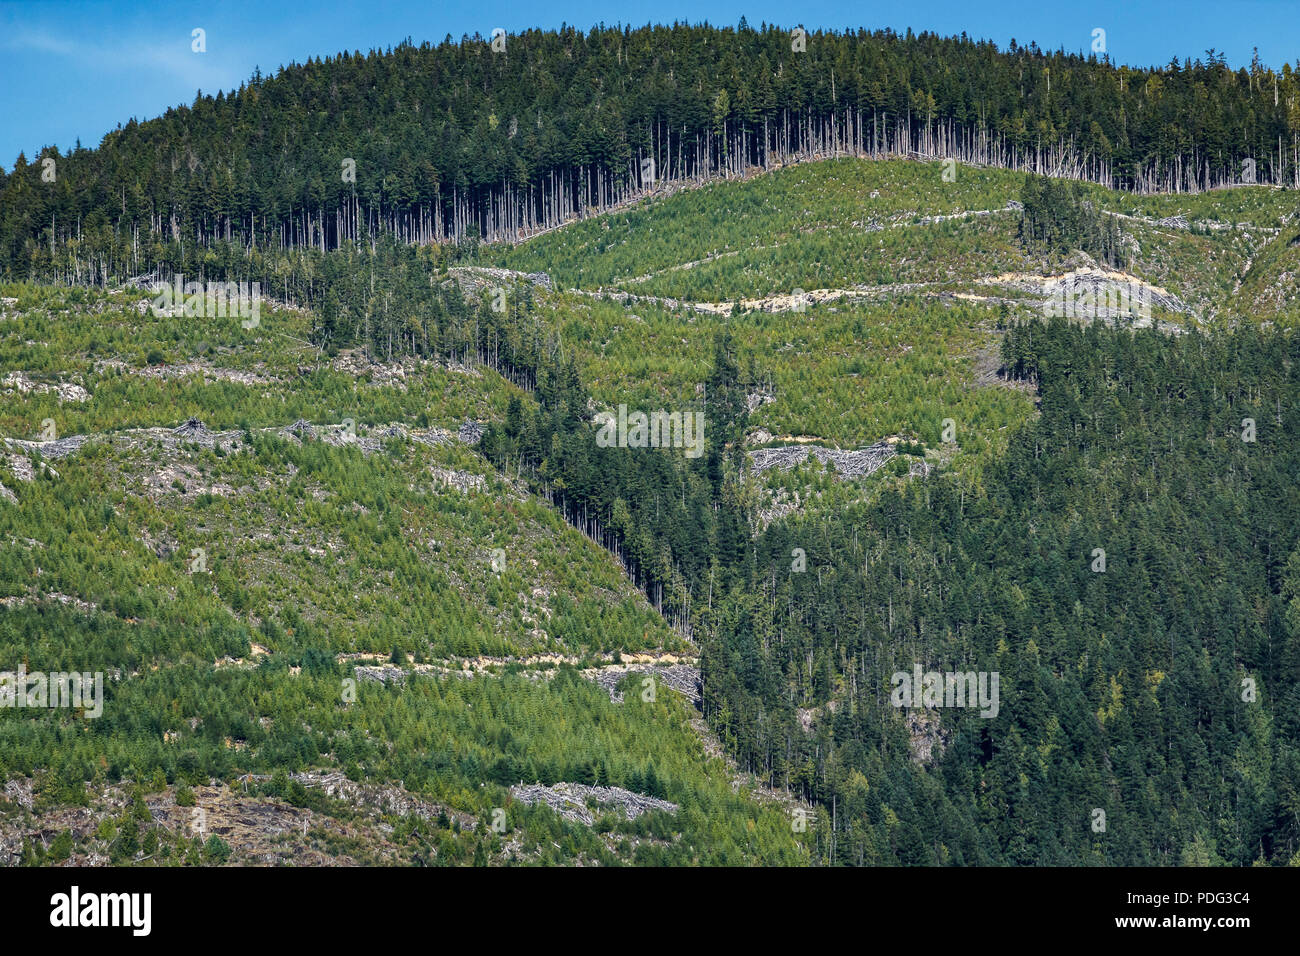 A large part of a mountainside in coastal British Columbia has been replanted, but logging roads, felled trees and slash still scar the landscape. Stock Photo